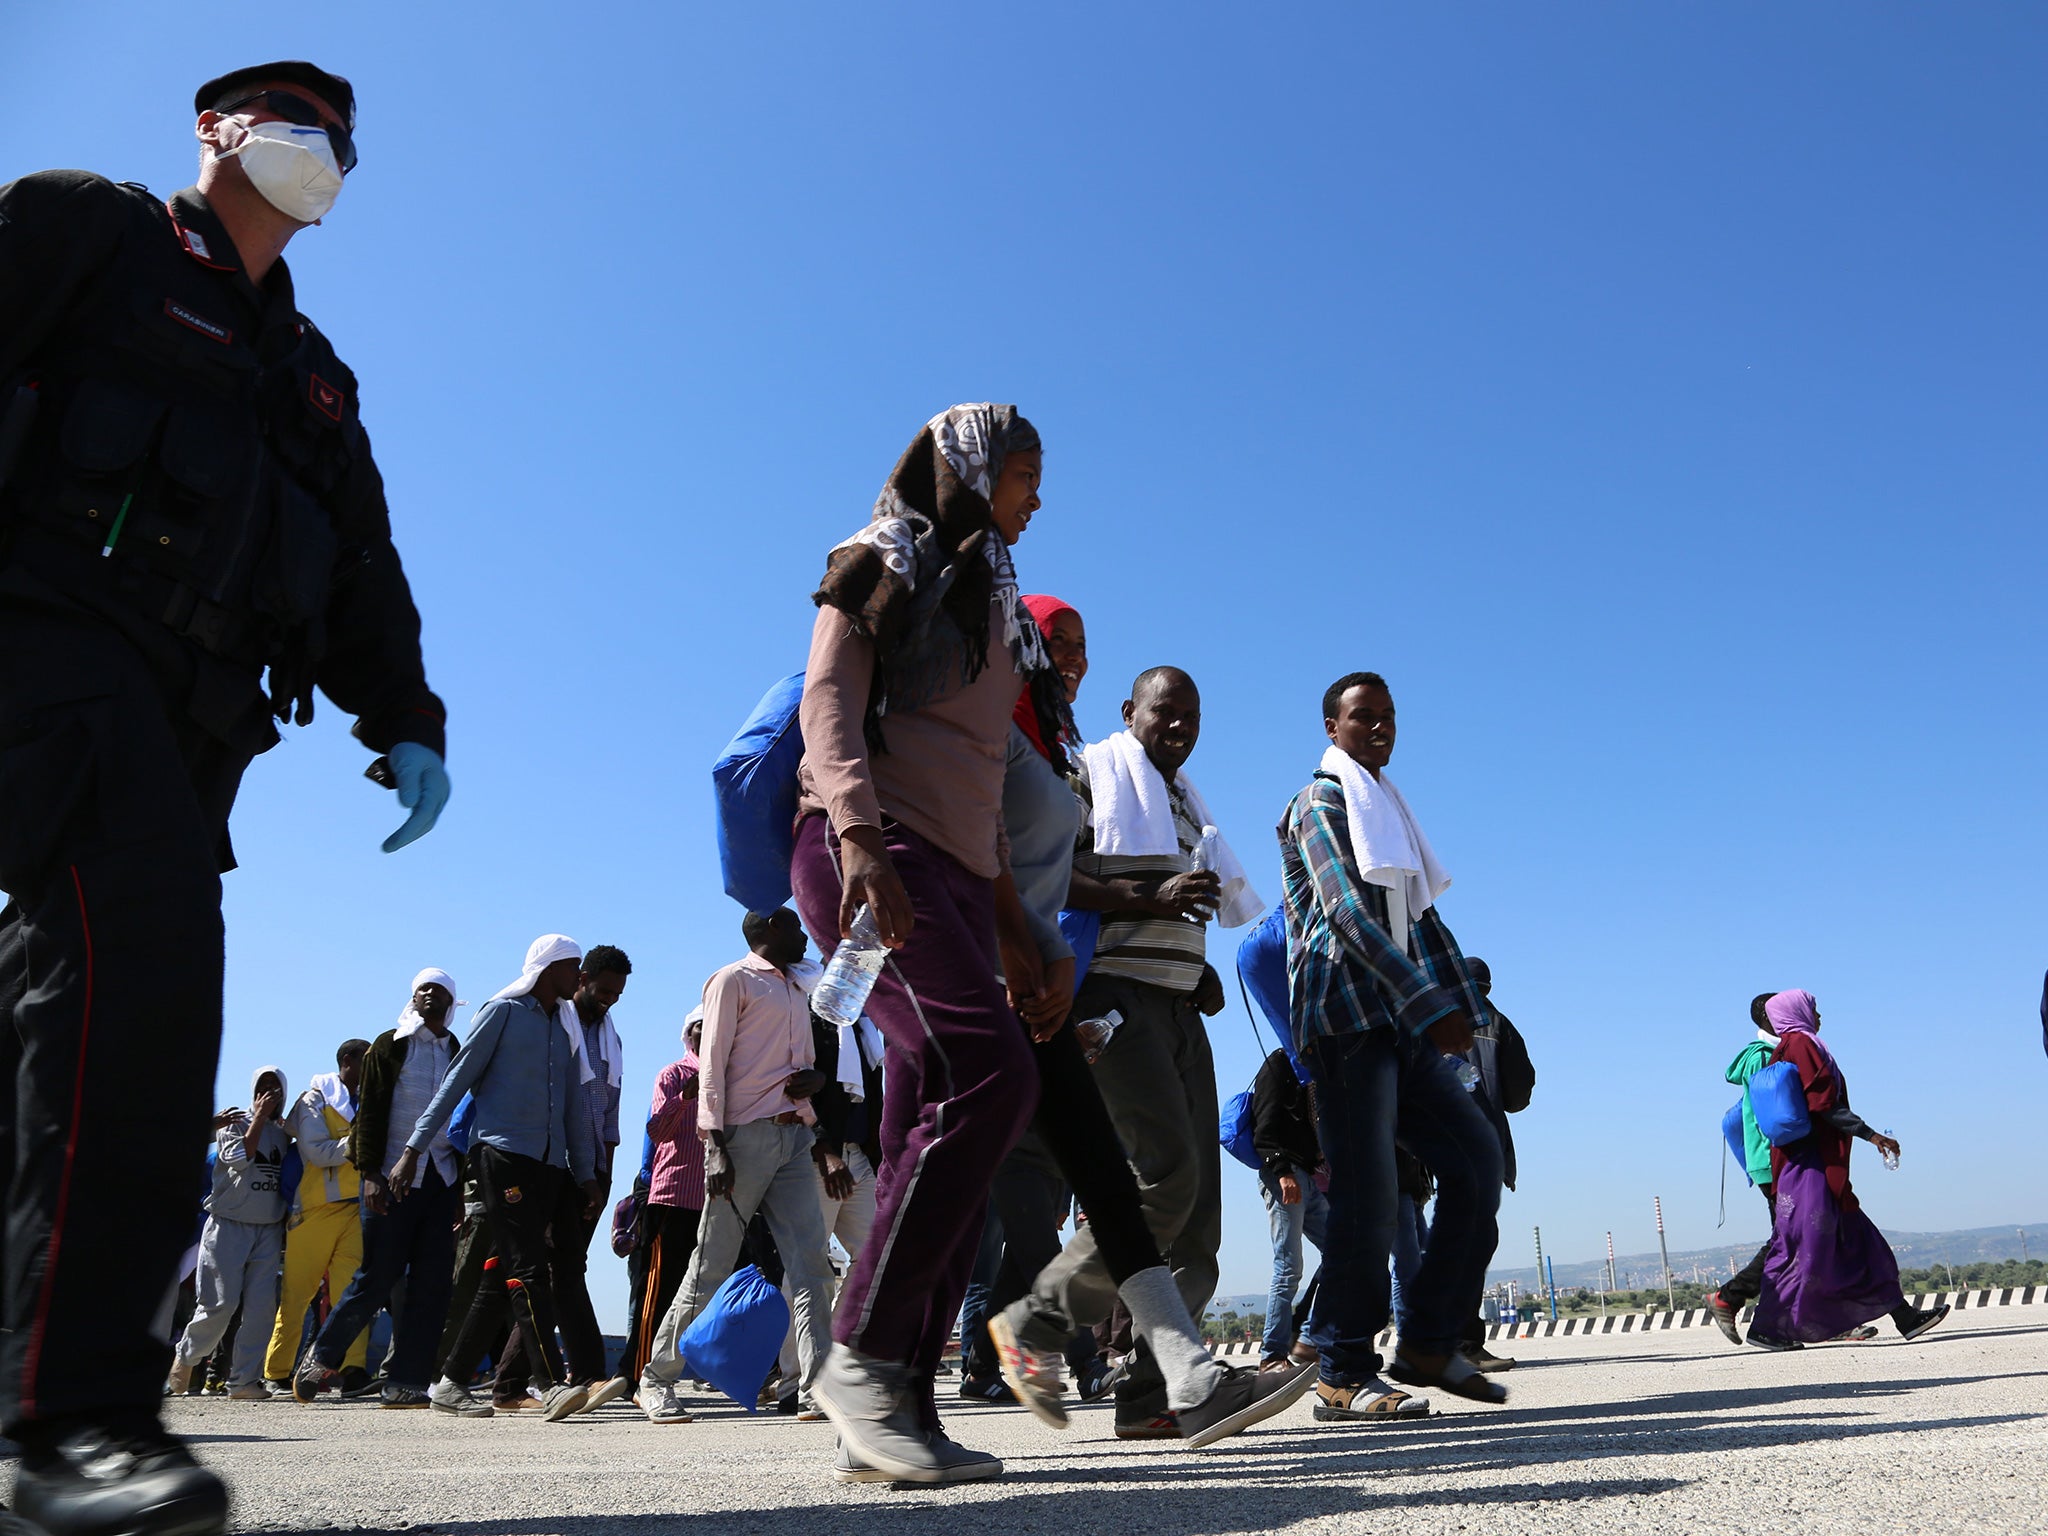 It is hoped a quota will spread migrants evenly across the EU